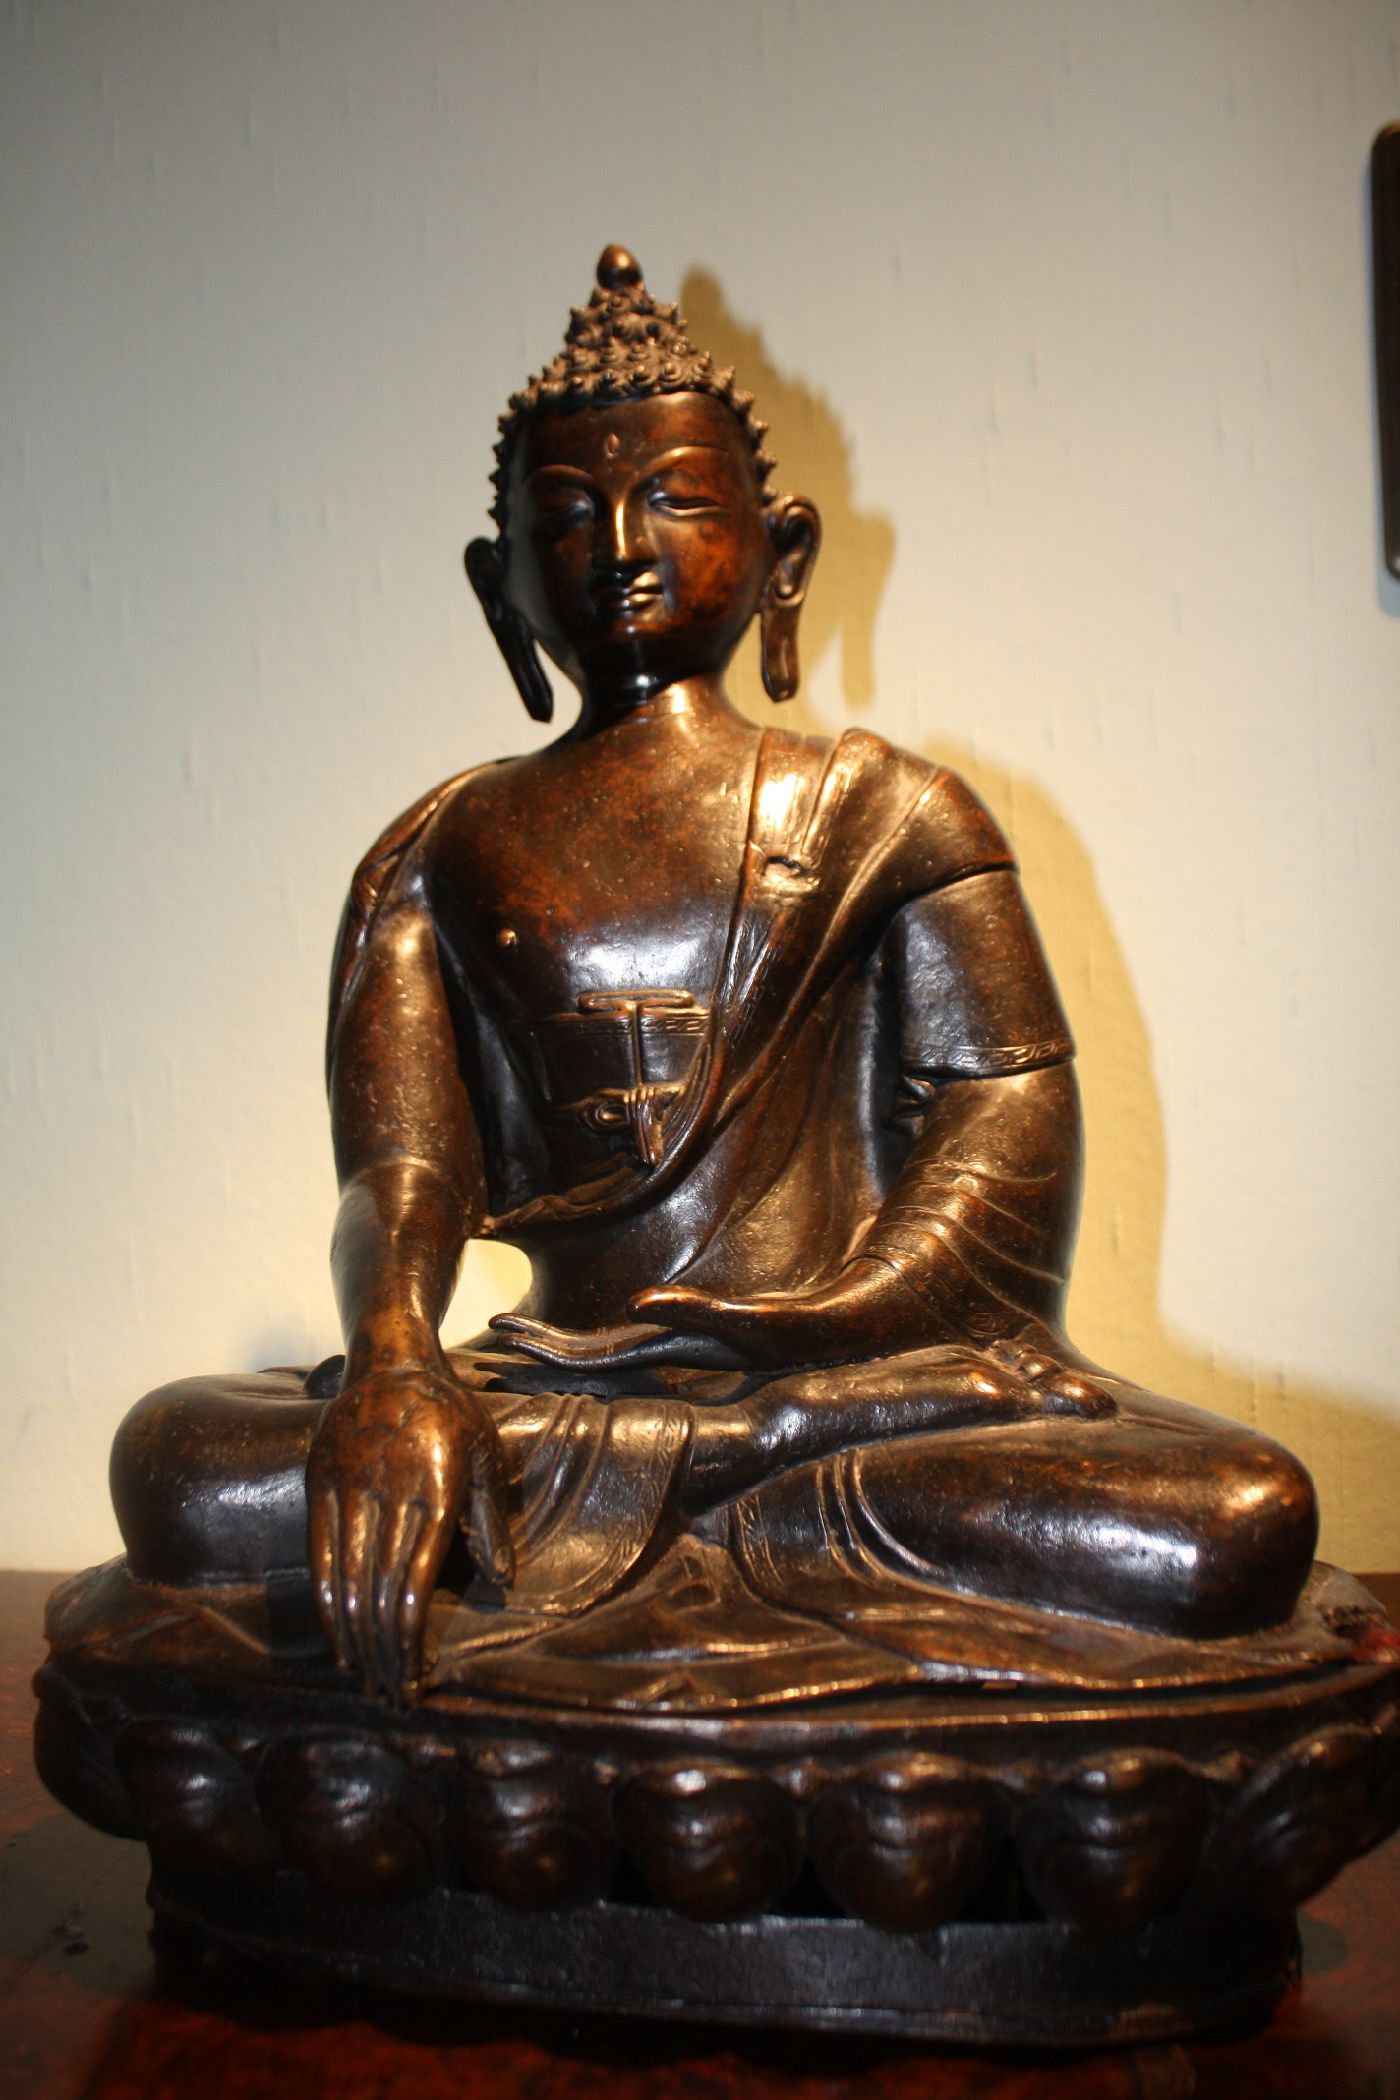 A large bronze cast metal 19th century Tibet Buddha statue, Buddha sitting on a lotus seat and touching the earth